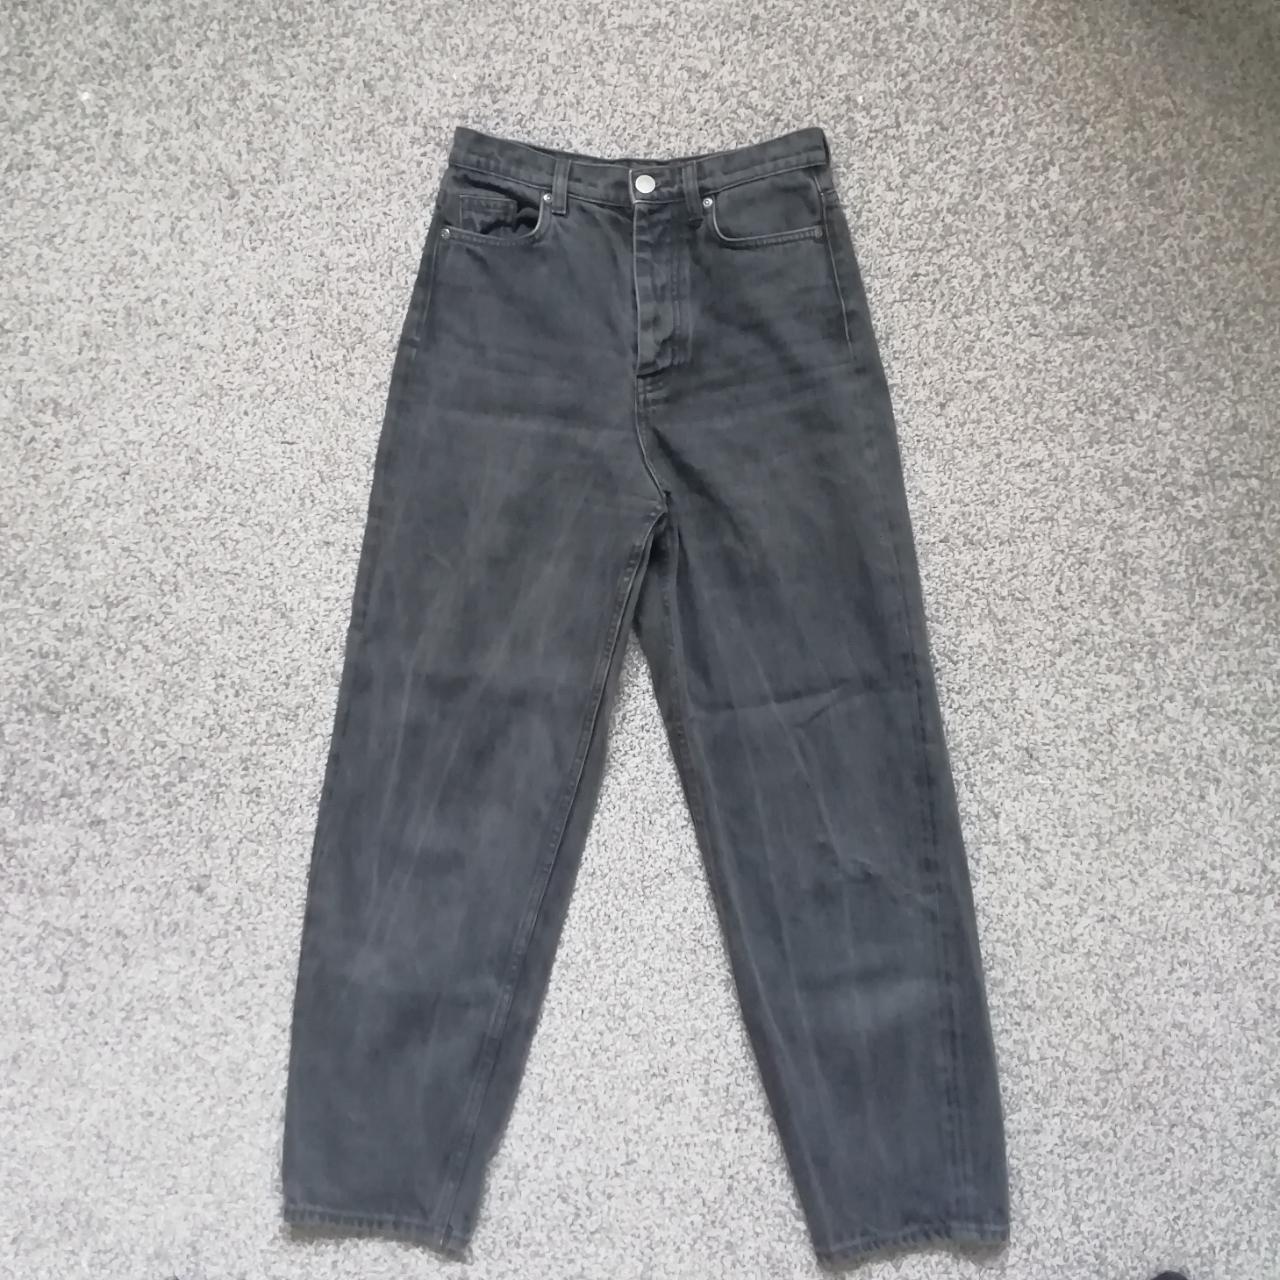 Cos tapered jeans in faded black/grey (colour ever... - Depop